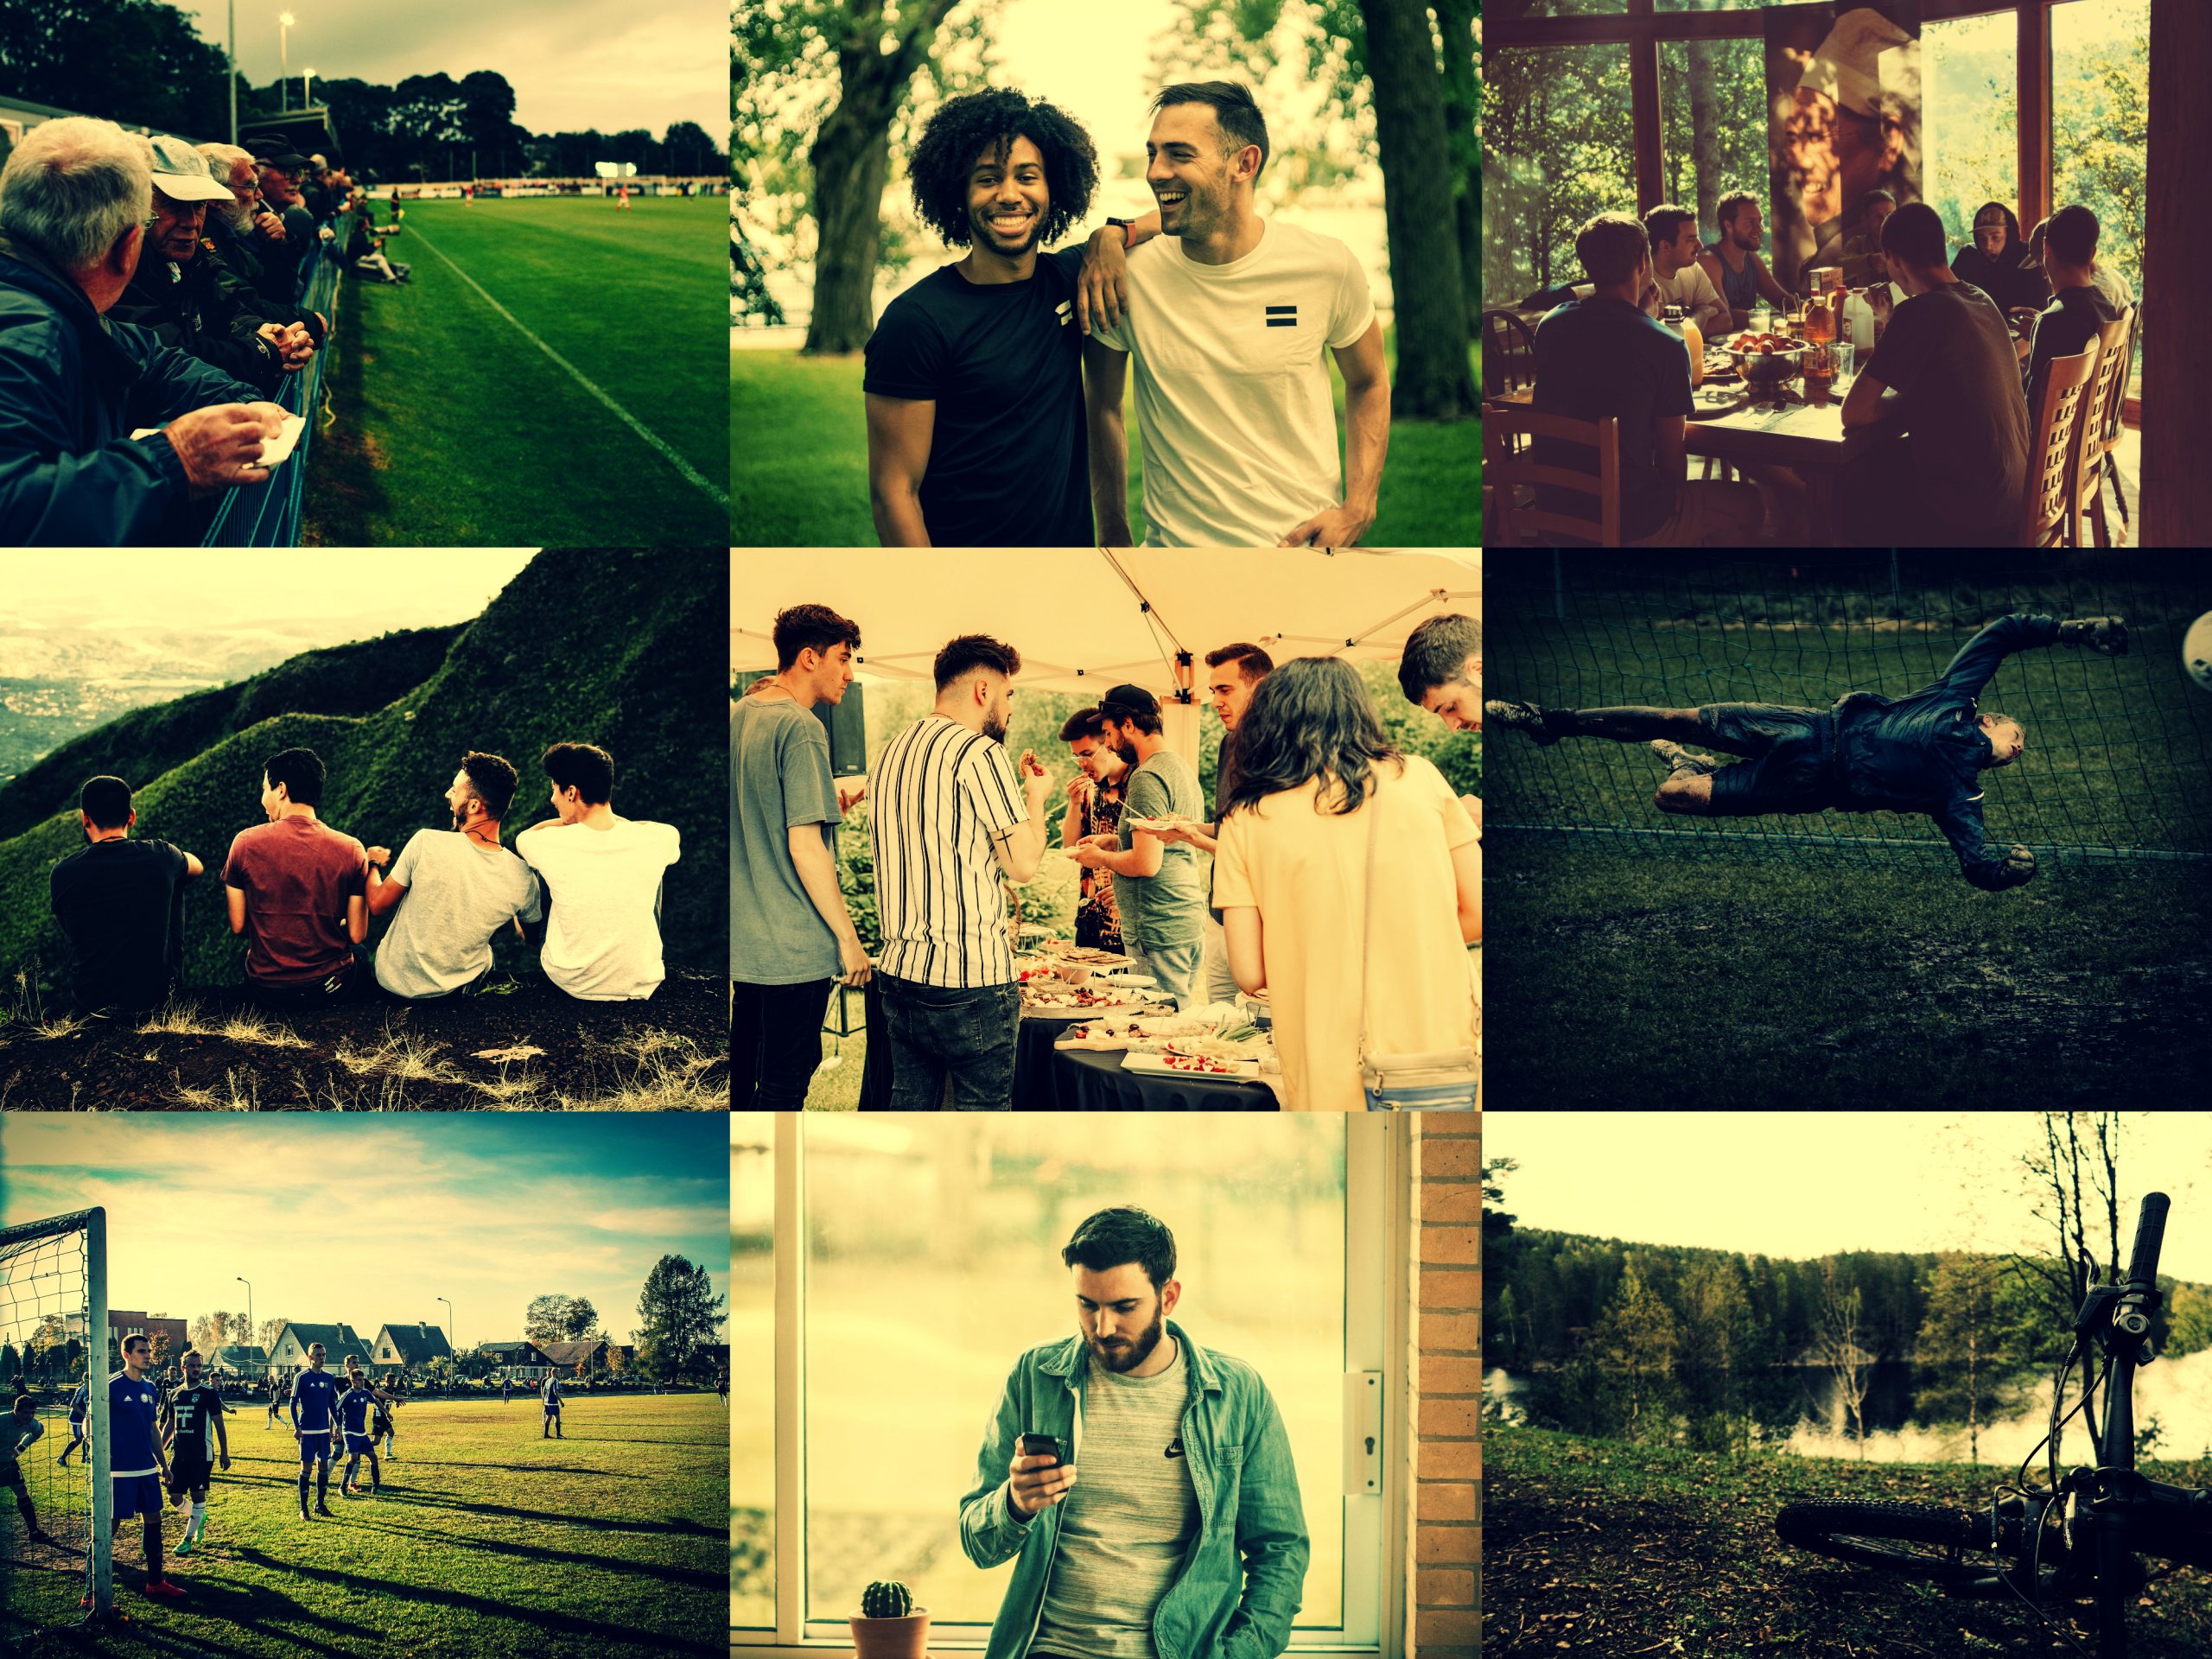 A collage of individuals in different activities being together.